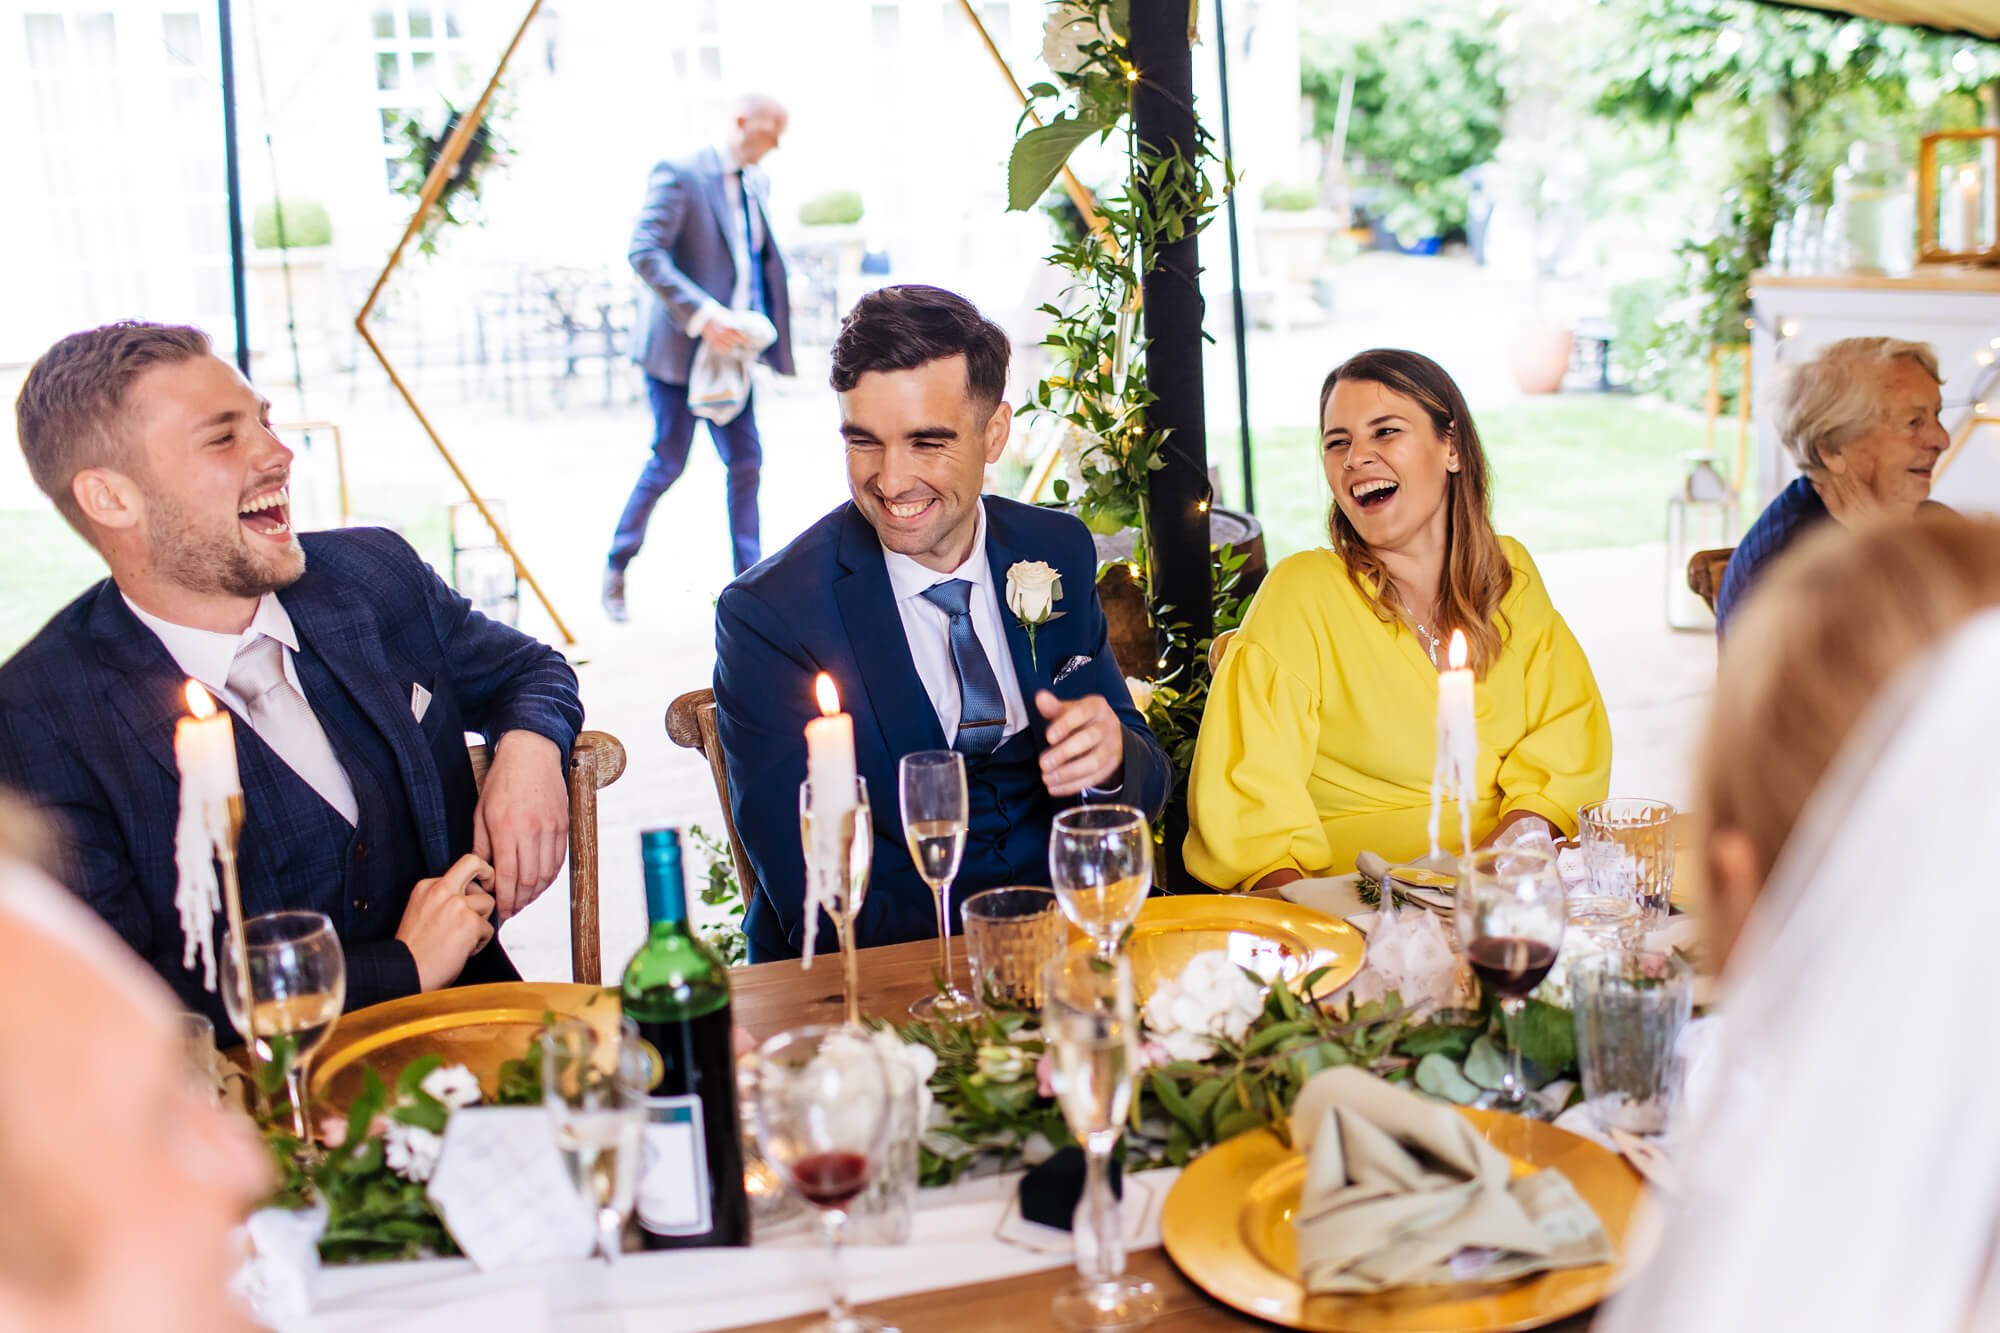 Wedding guests laughing during their meal